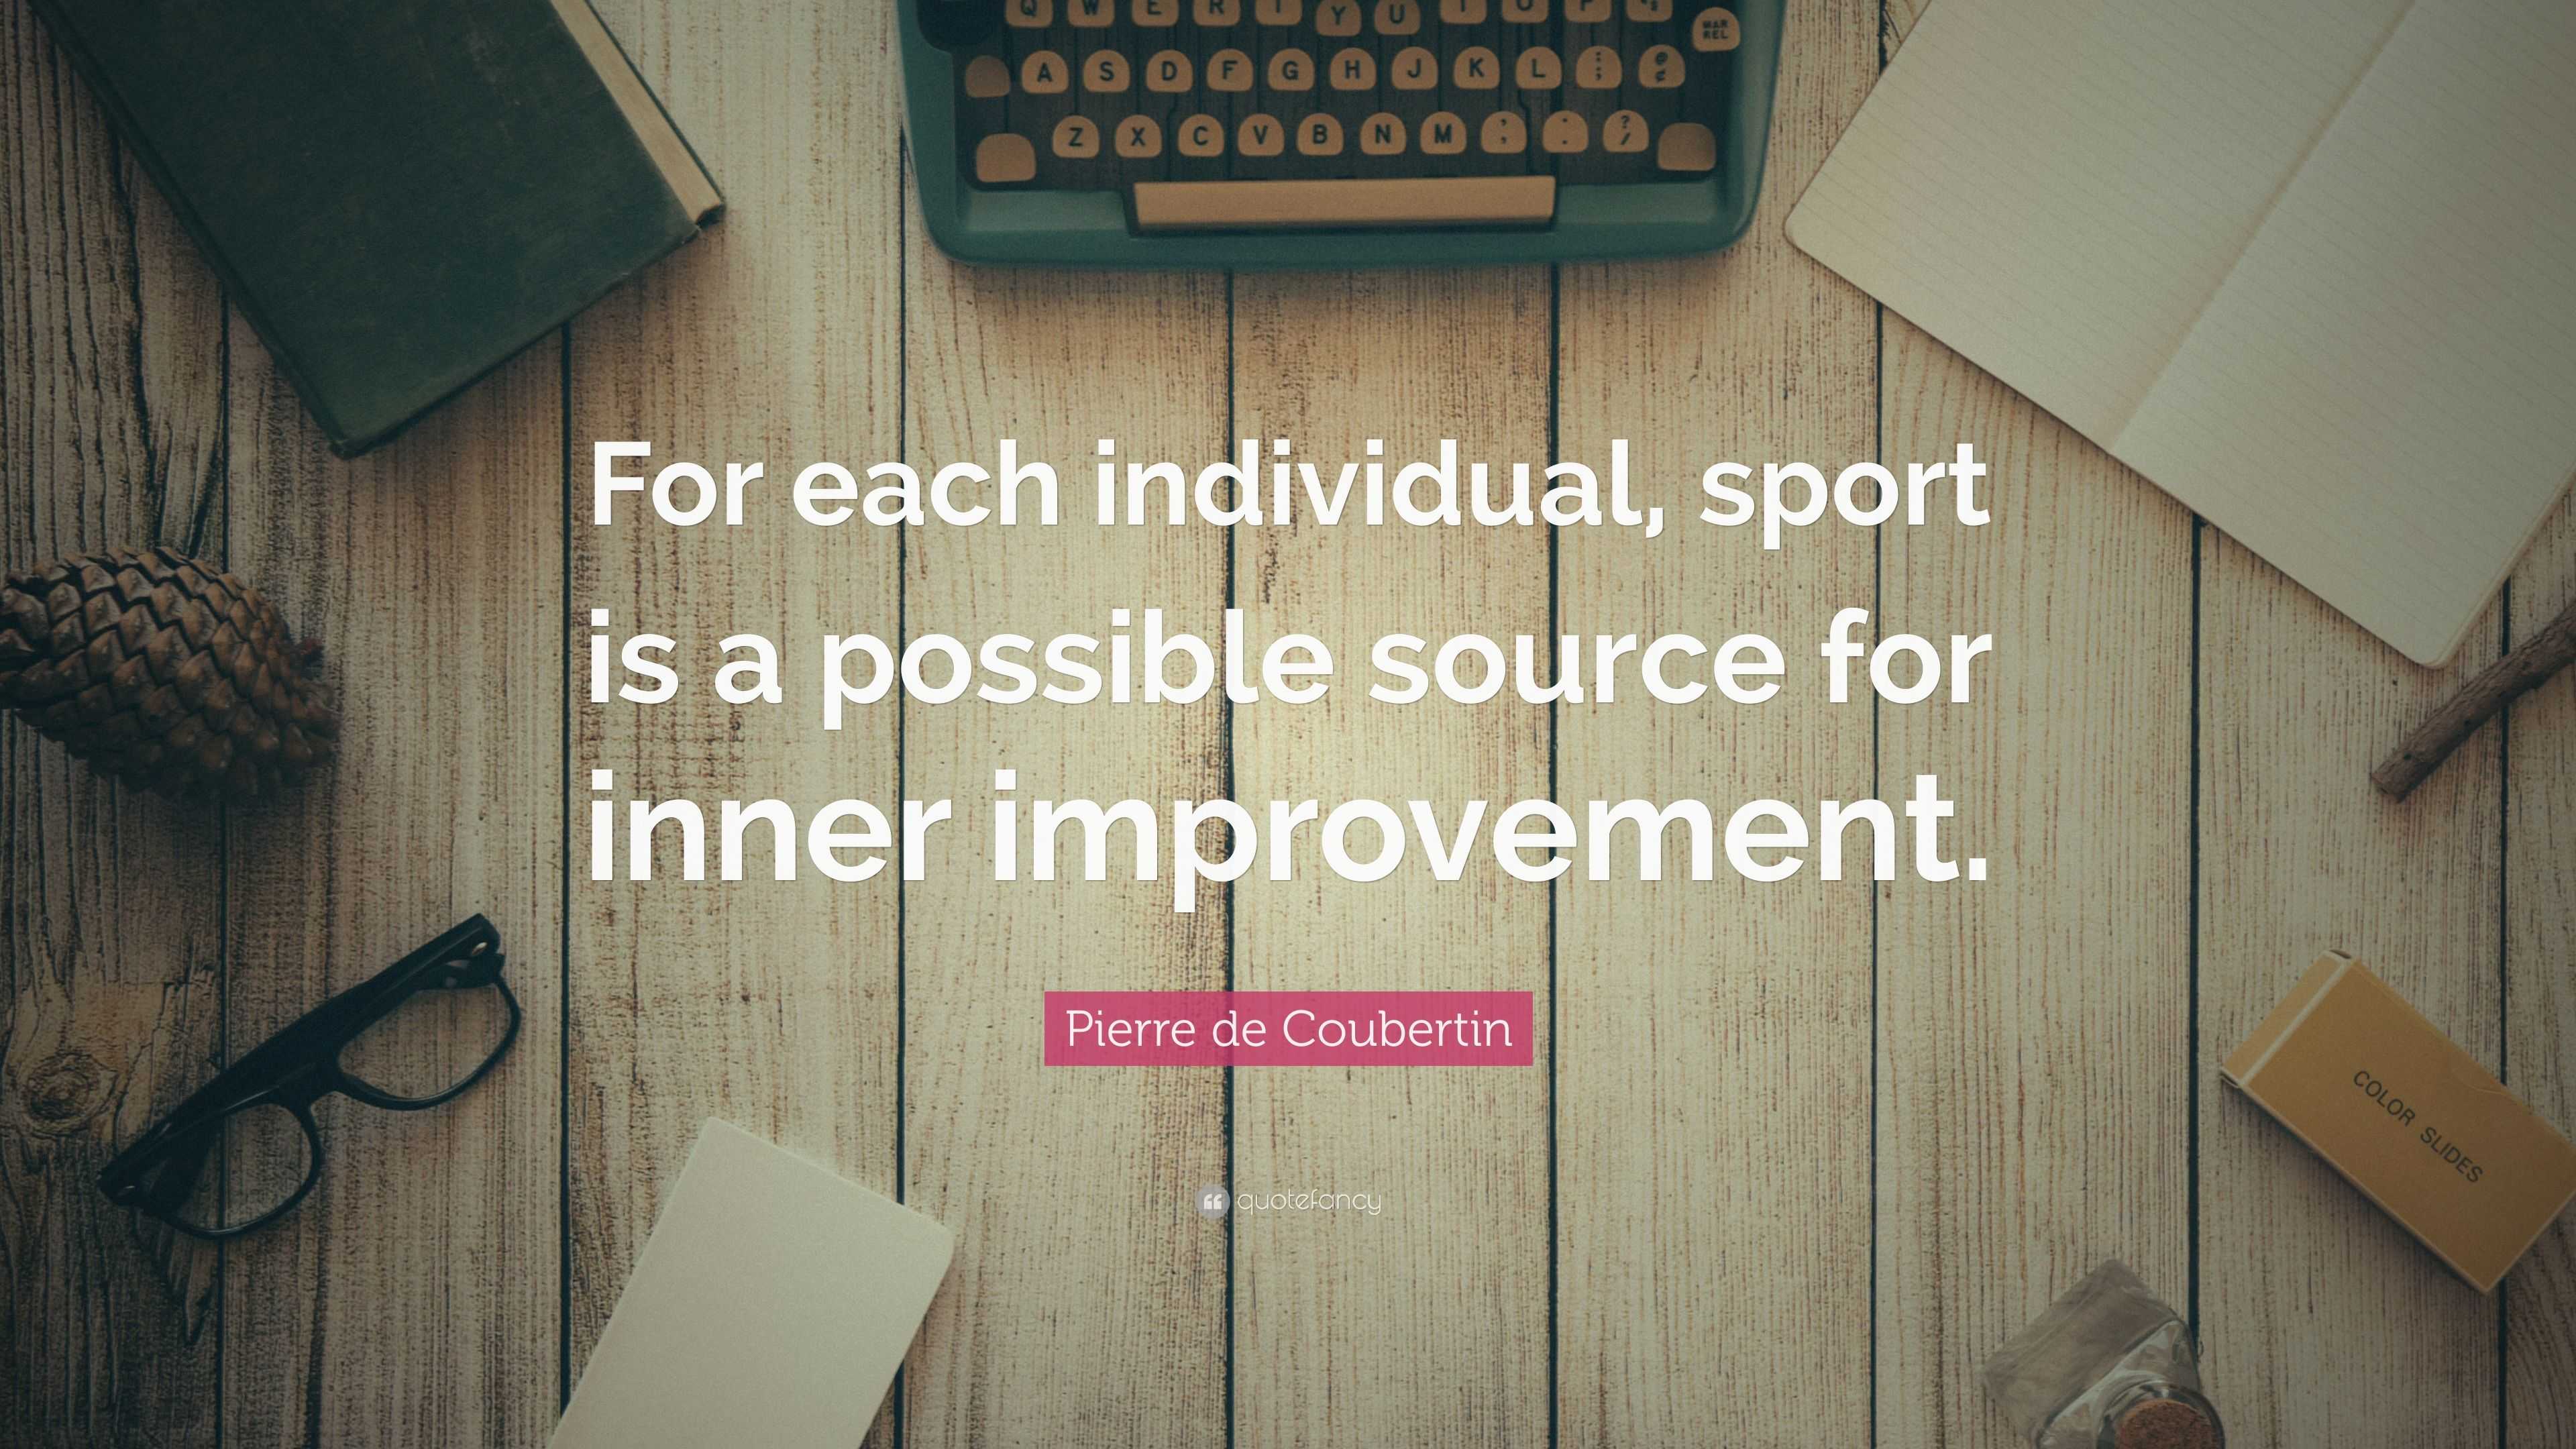 Pierre de Coubertin Quote: “For each individual, sport is a possible